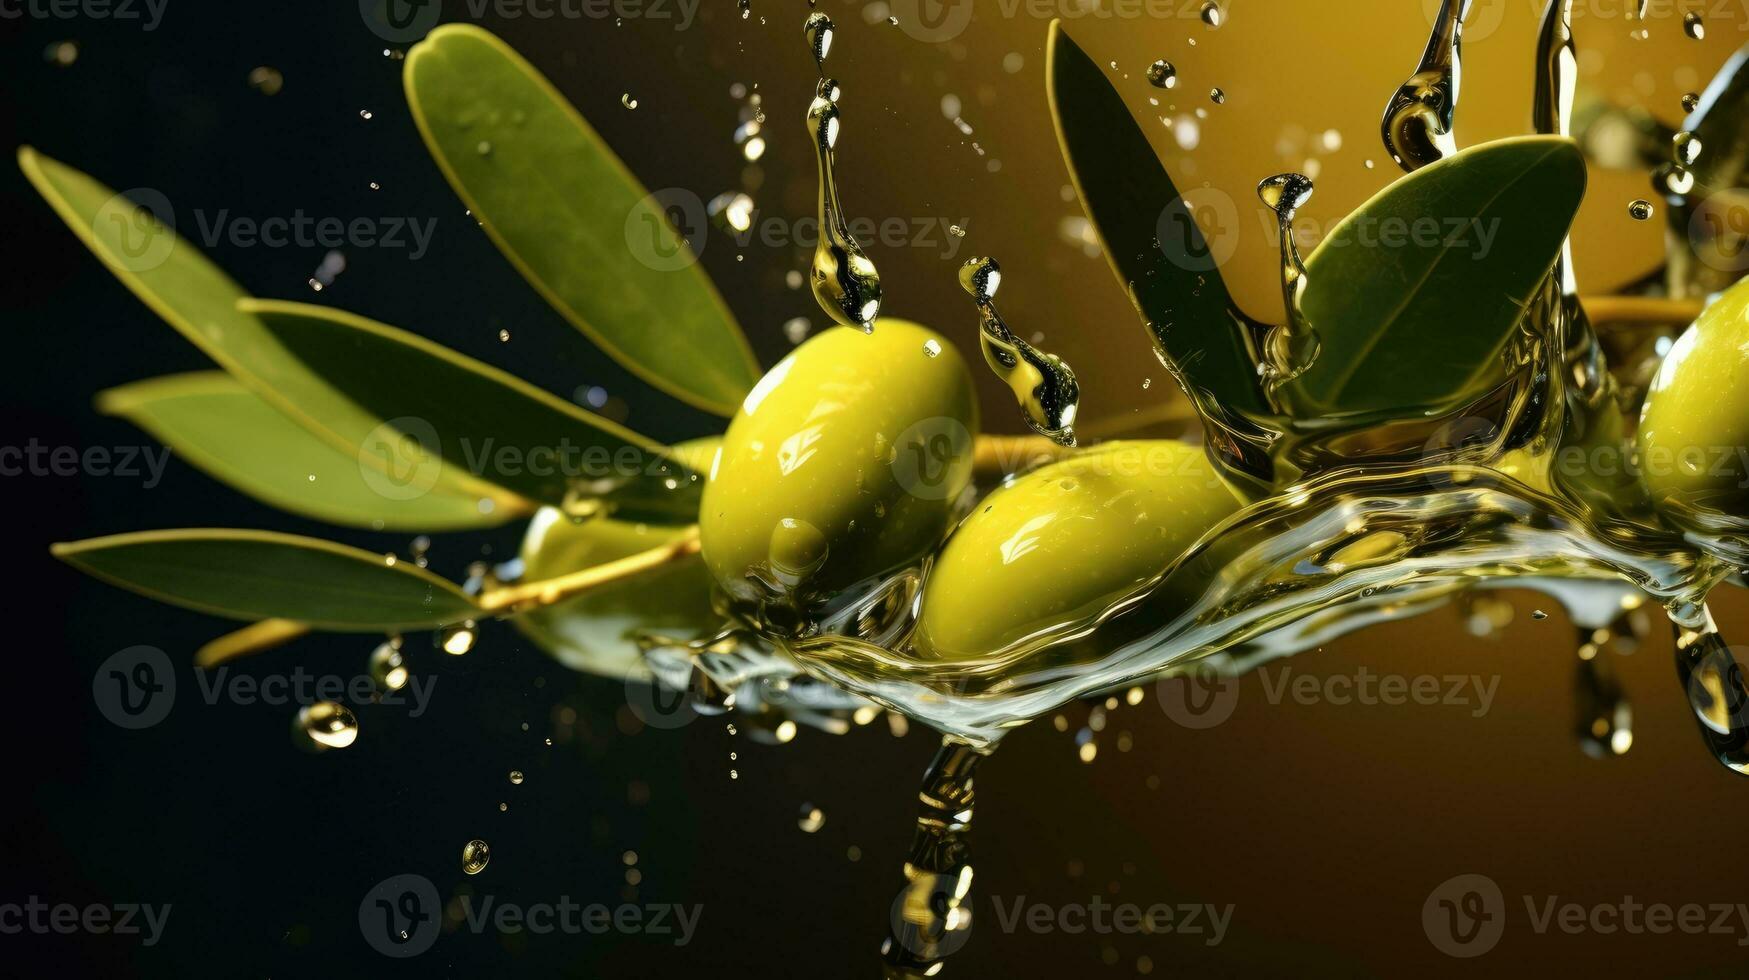 Extra virgin olive oil. Green olives in olive oil on a dark background. photo